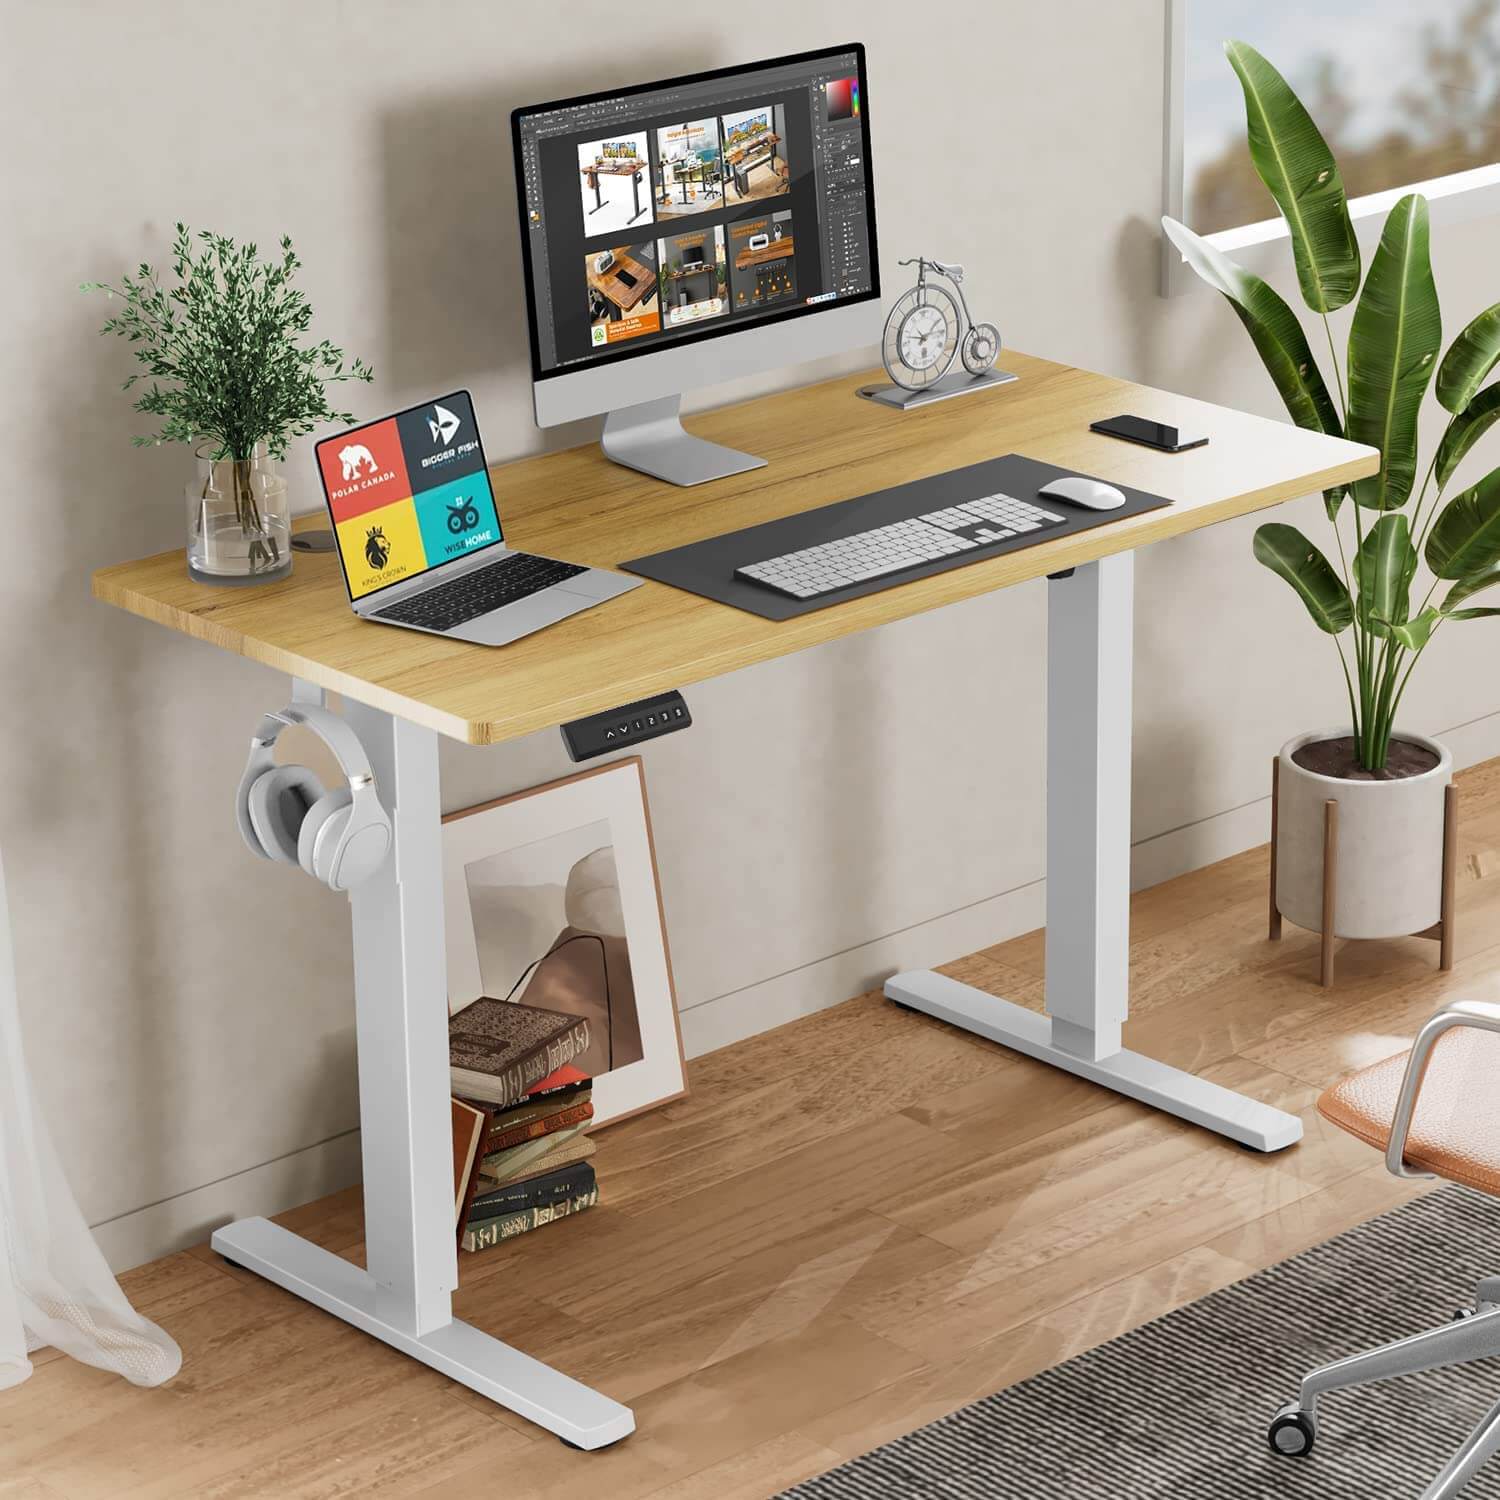 Electric Height Adjustable Standing Desk,Sit to Stand Ergonomic Comput